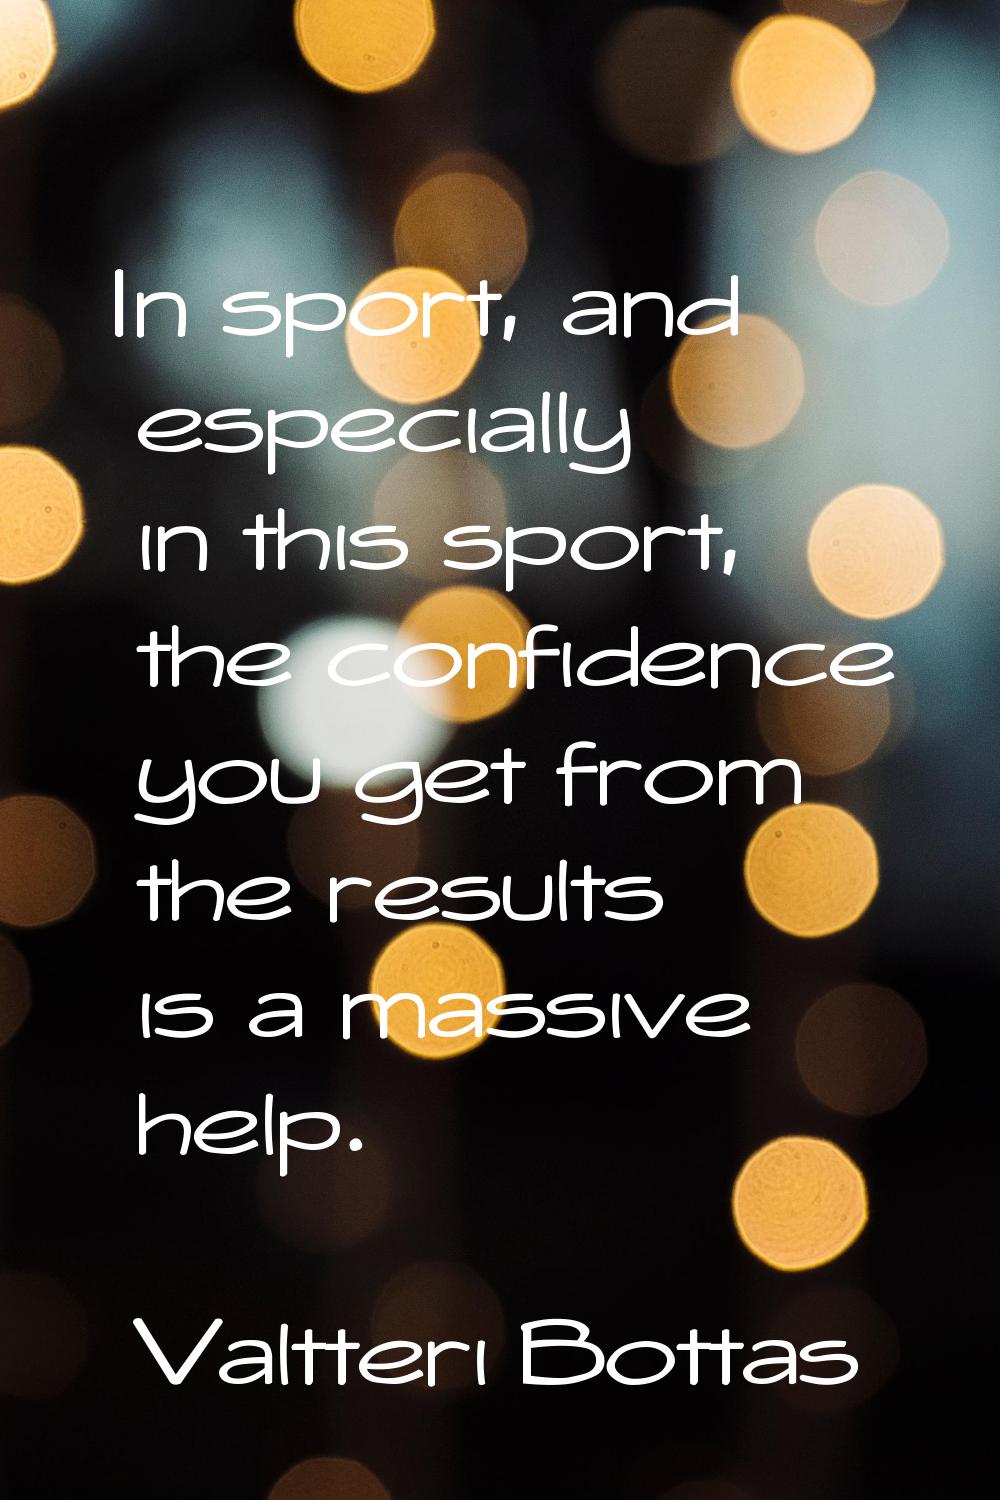 In sport, and especially in this sport, the confidence you get from the results is a massive help.